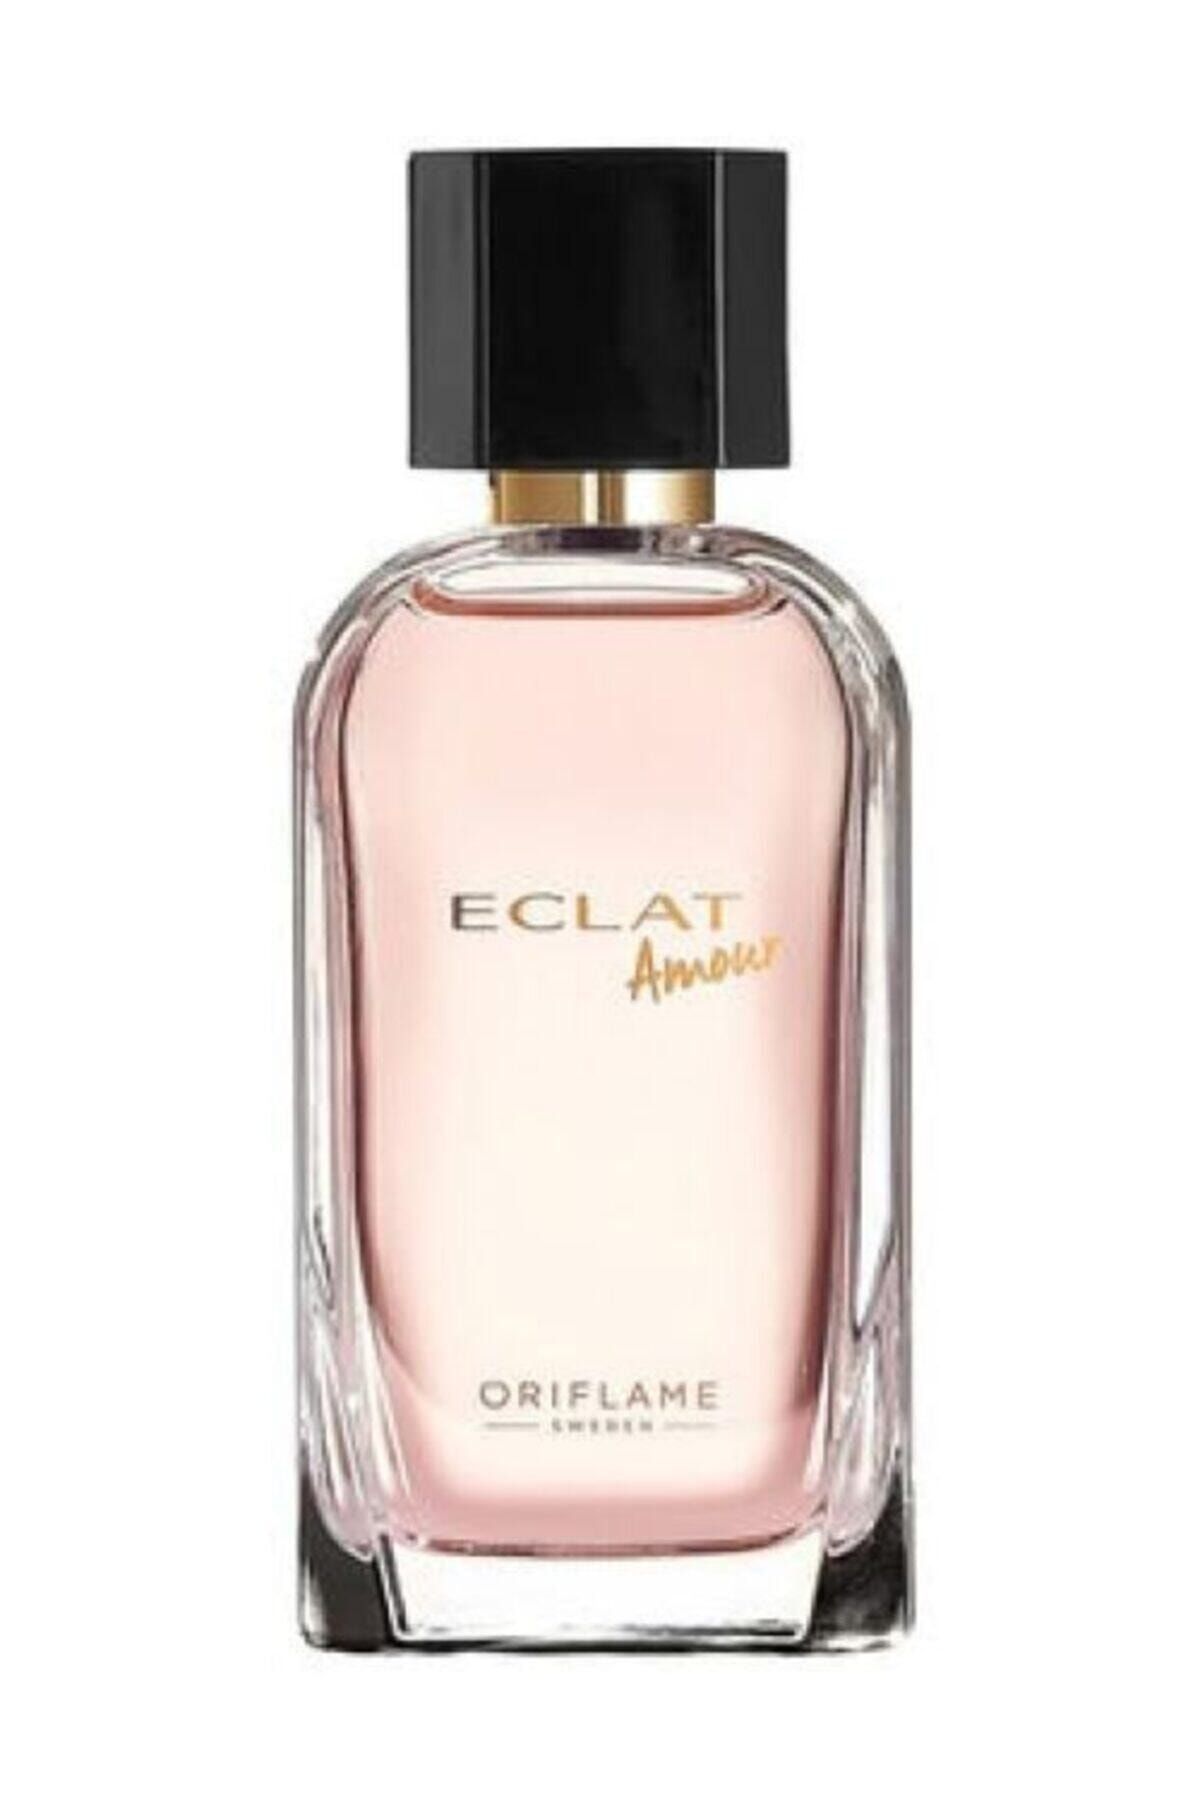 Oriflame Eclat Amour Edt .35649